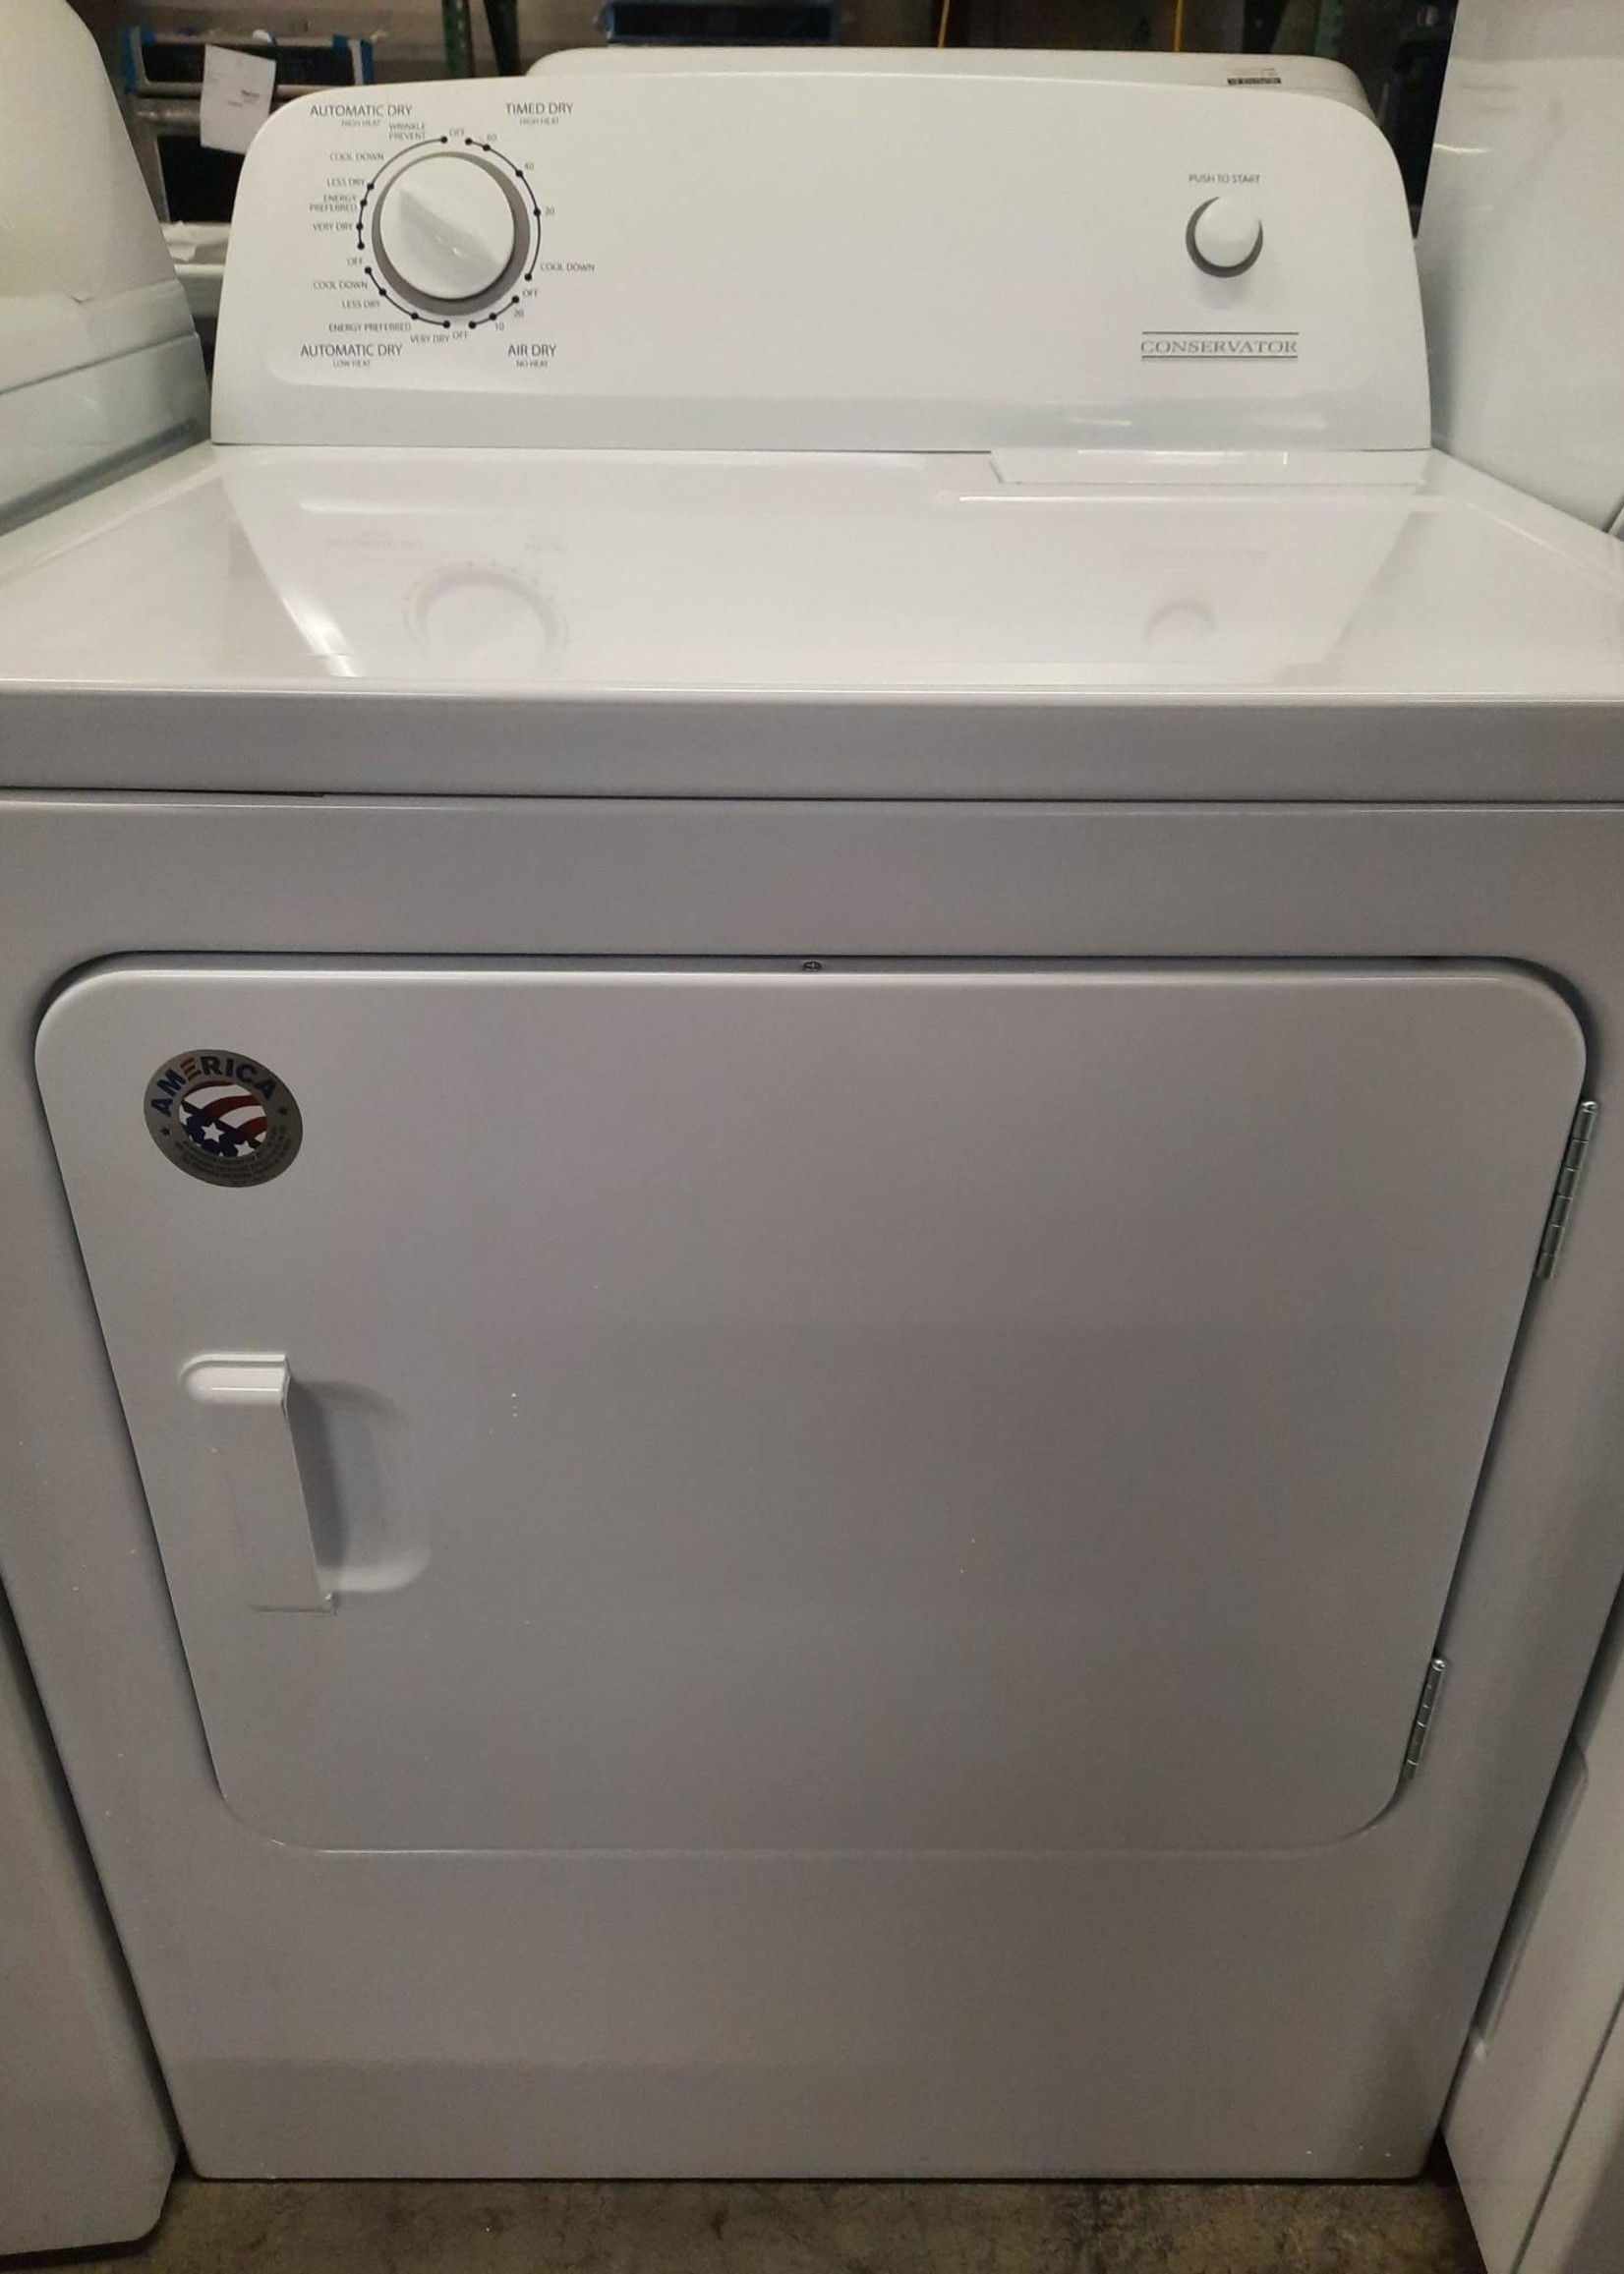 Conservator **Conservator VED6505GW0   6.5 cu ft Electric Dryer in White